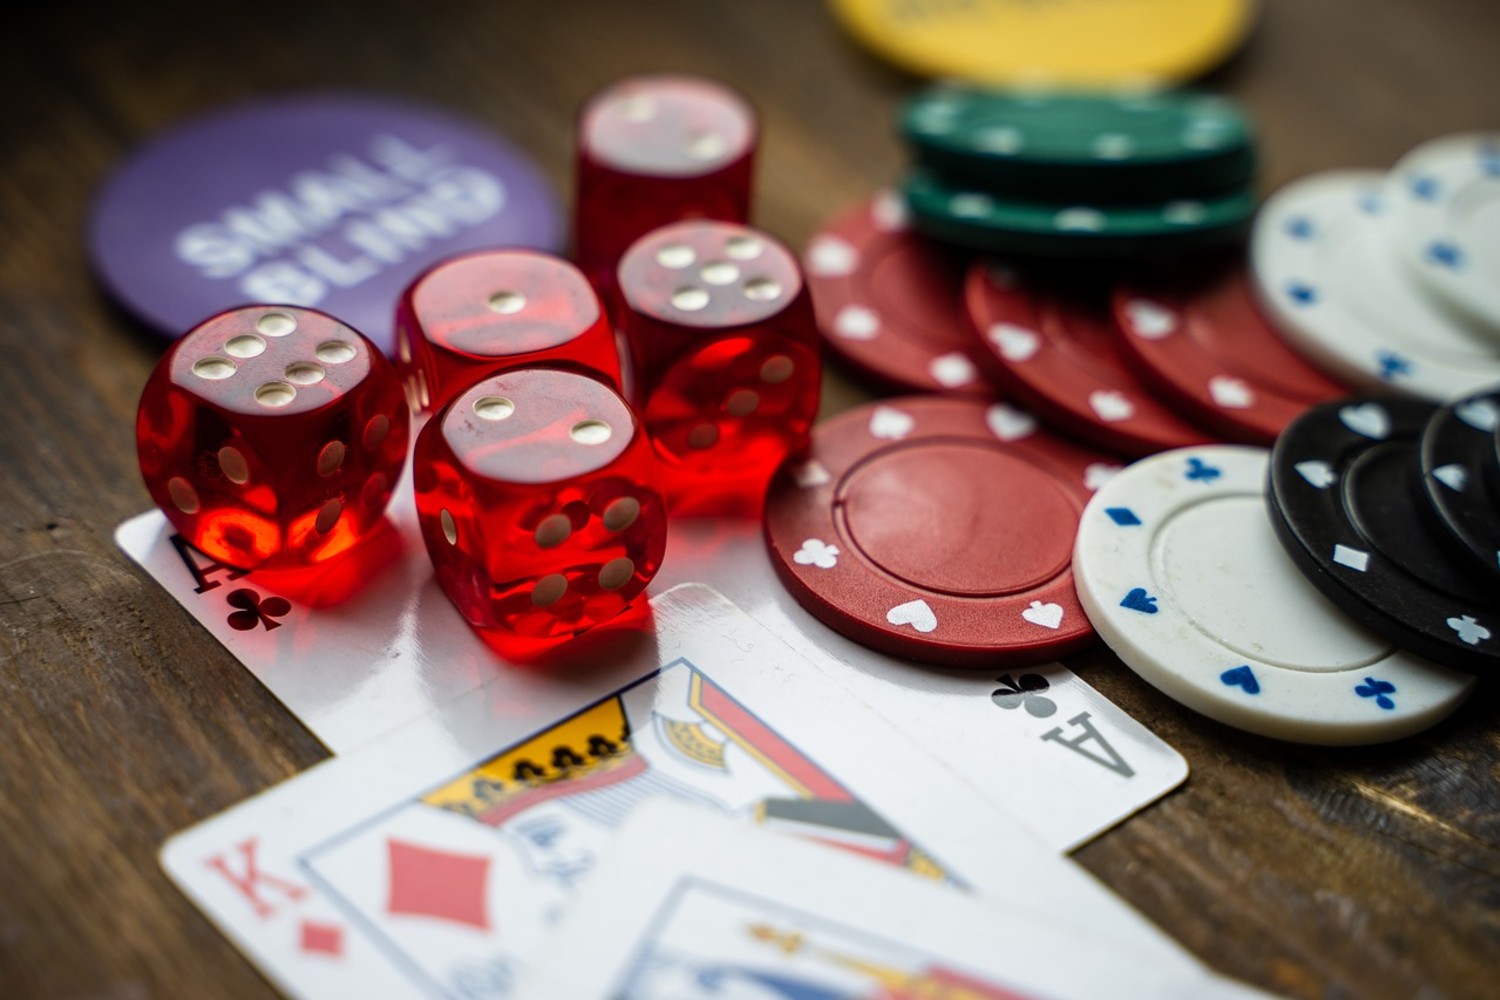 The Rise of Online Casinos: Why They’re So Popular